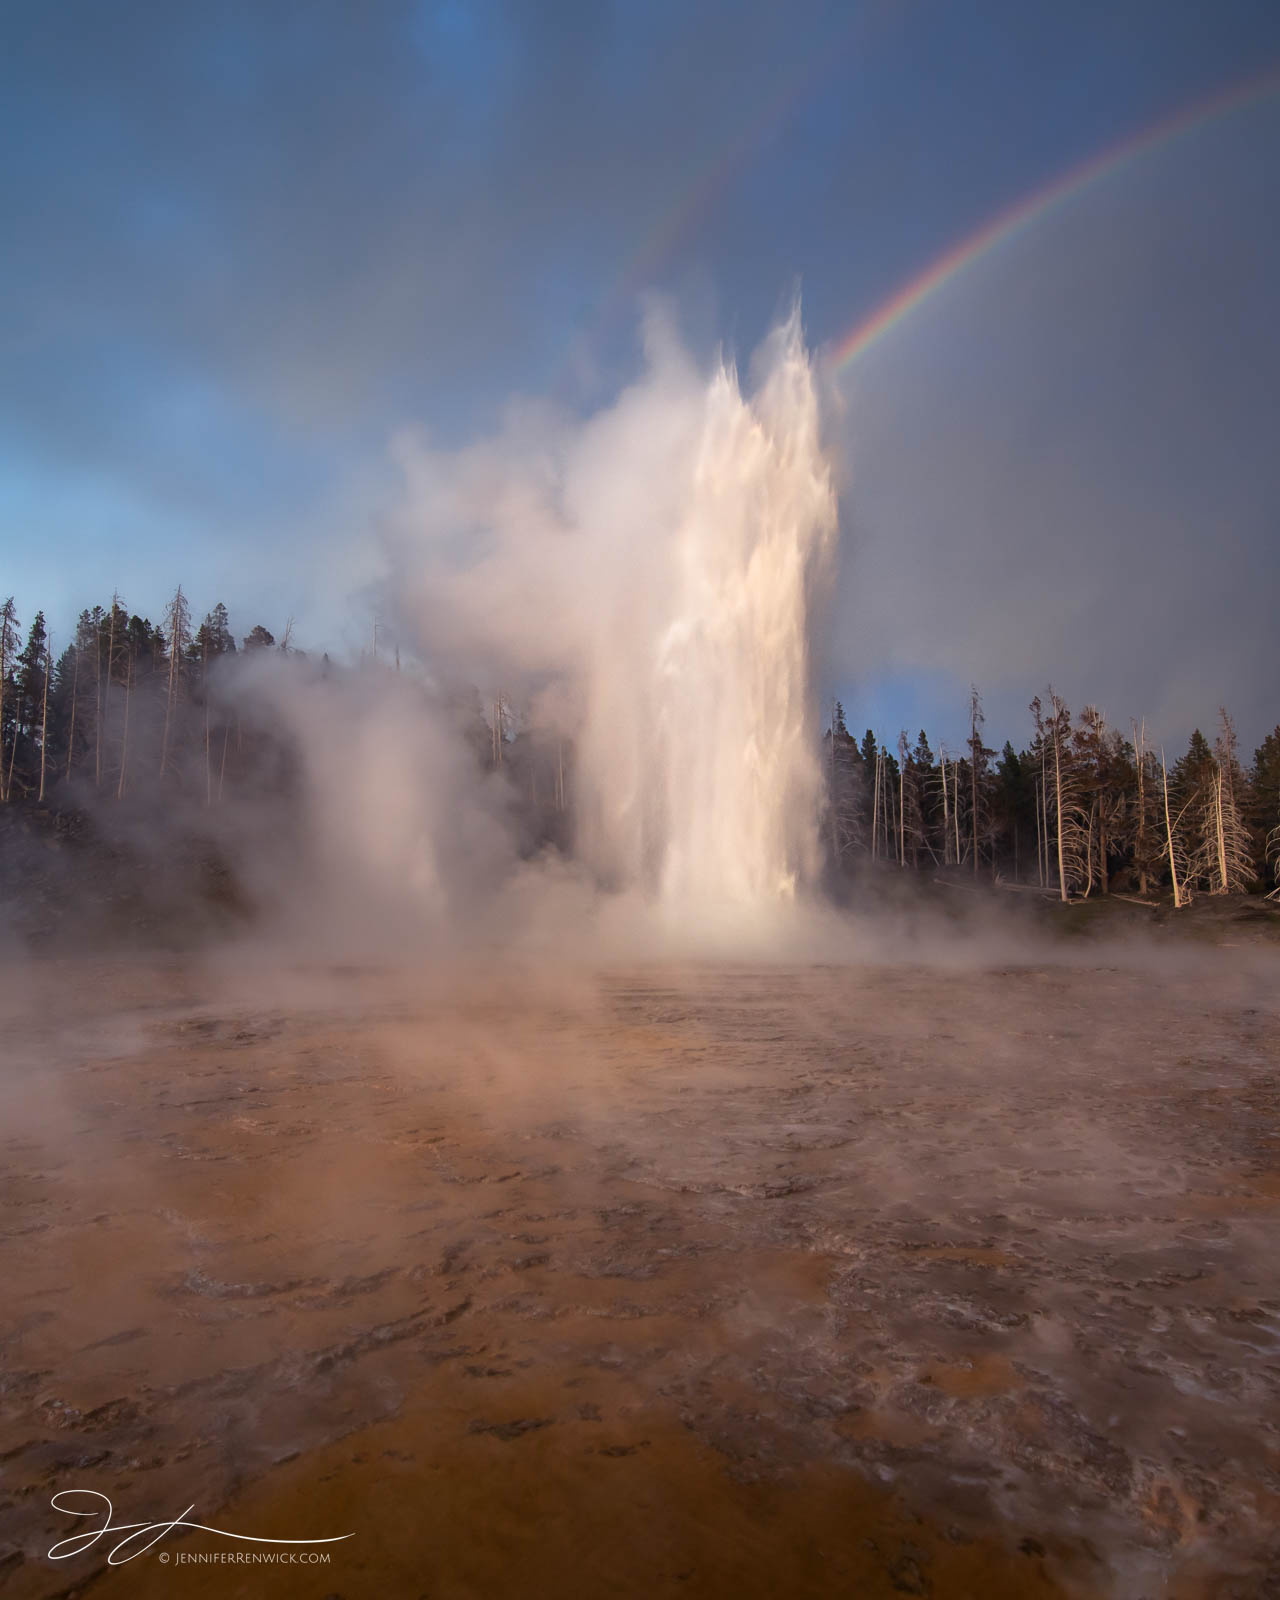 Grand Geyser erupts under stormy skies and a double rainbow.